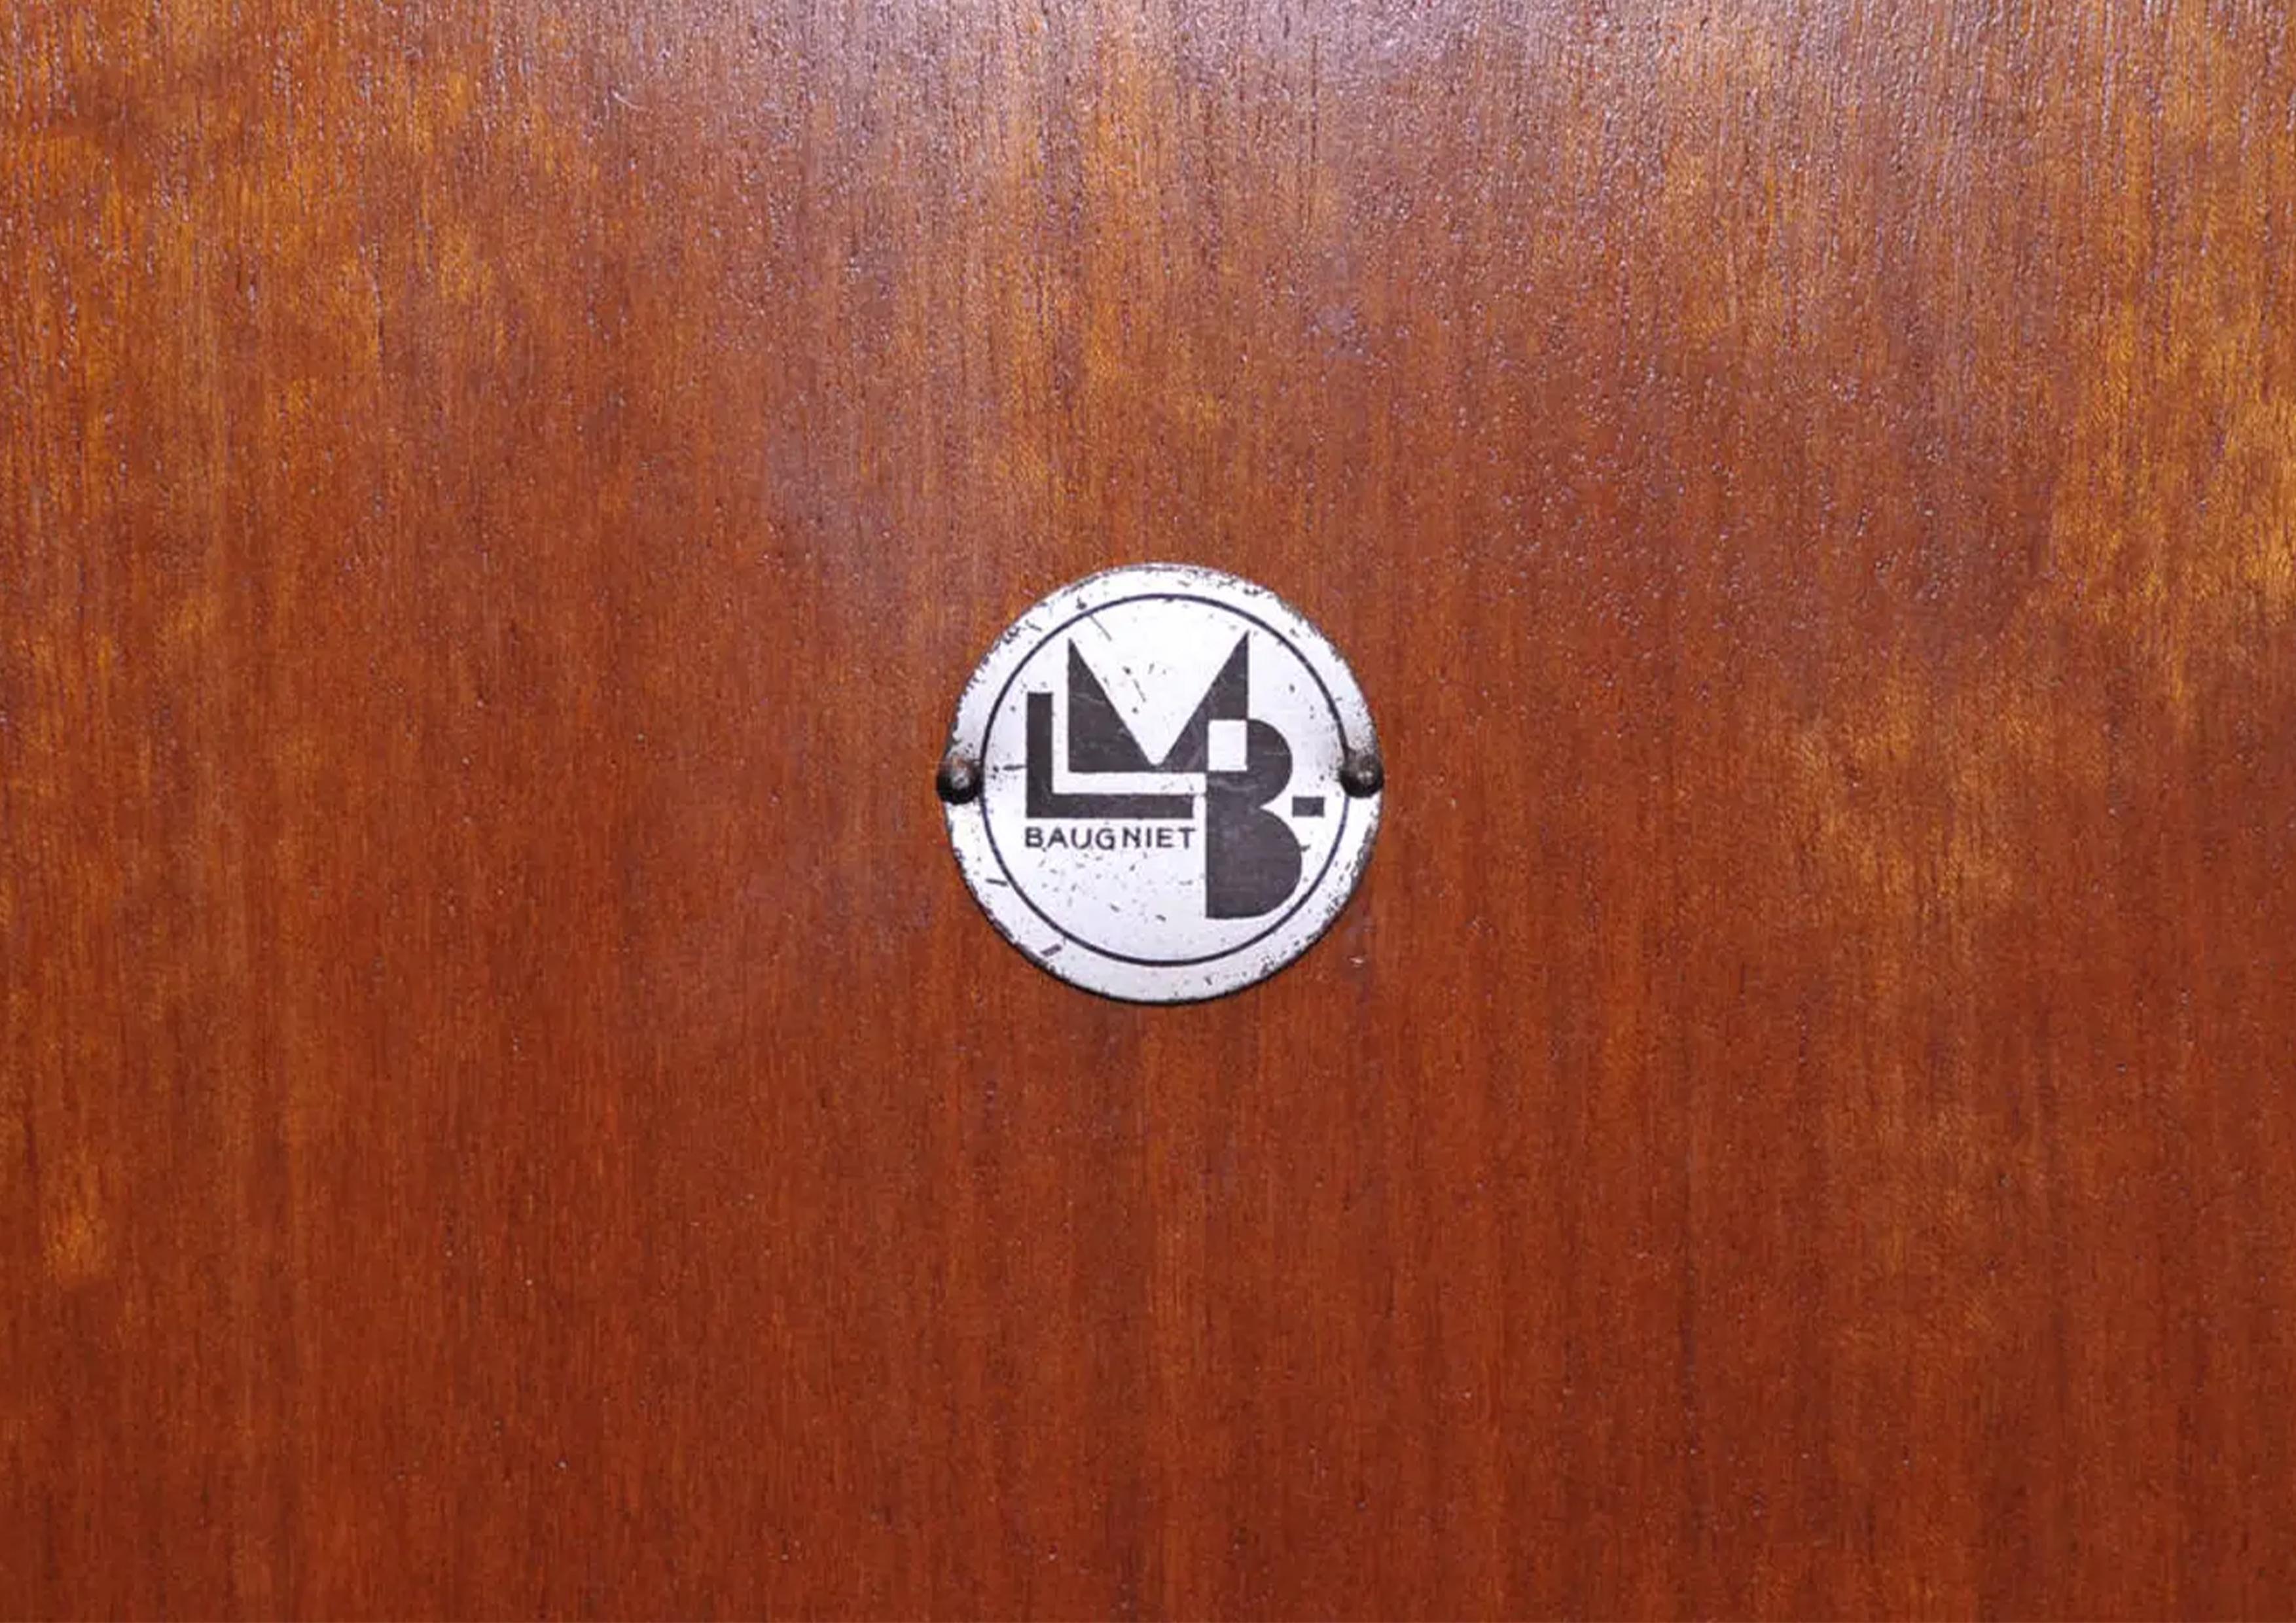 20th century furniture makers' marks